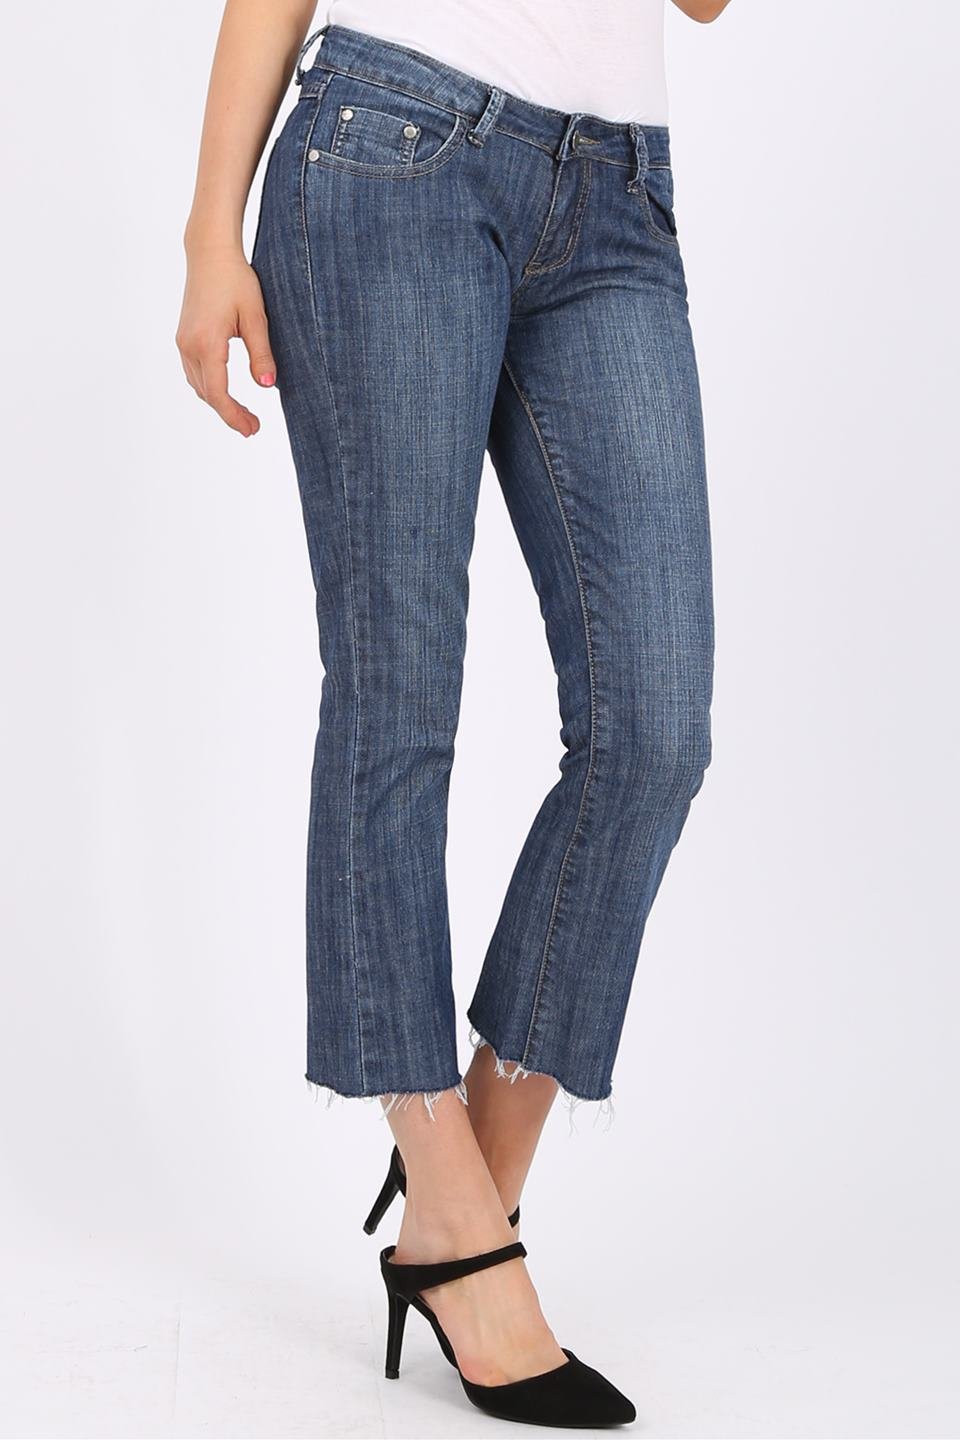 MISS PINKI Presley cropped jeans in blue